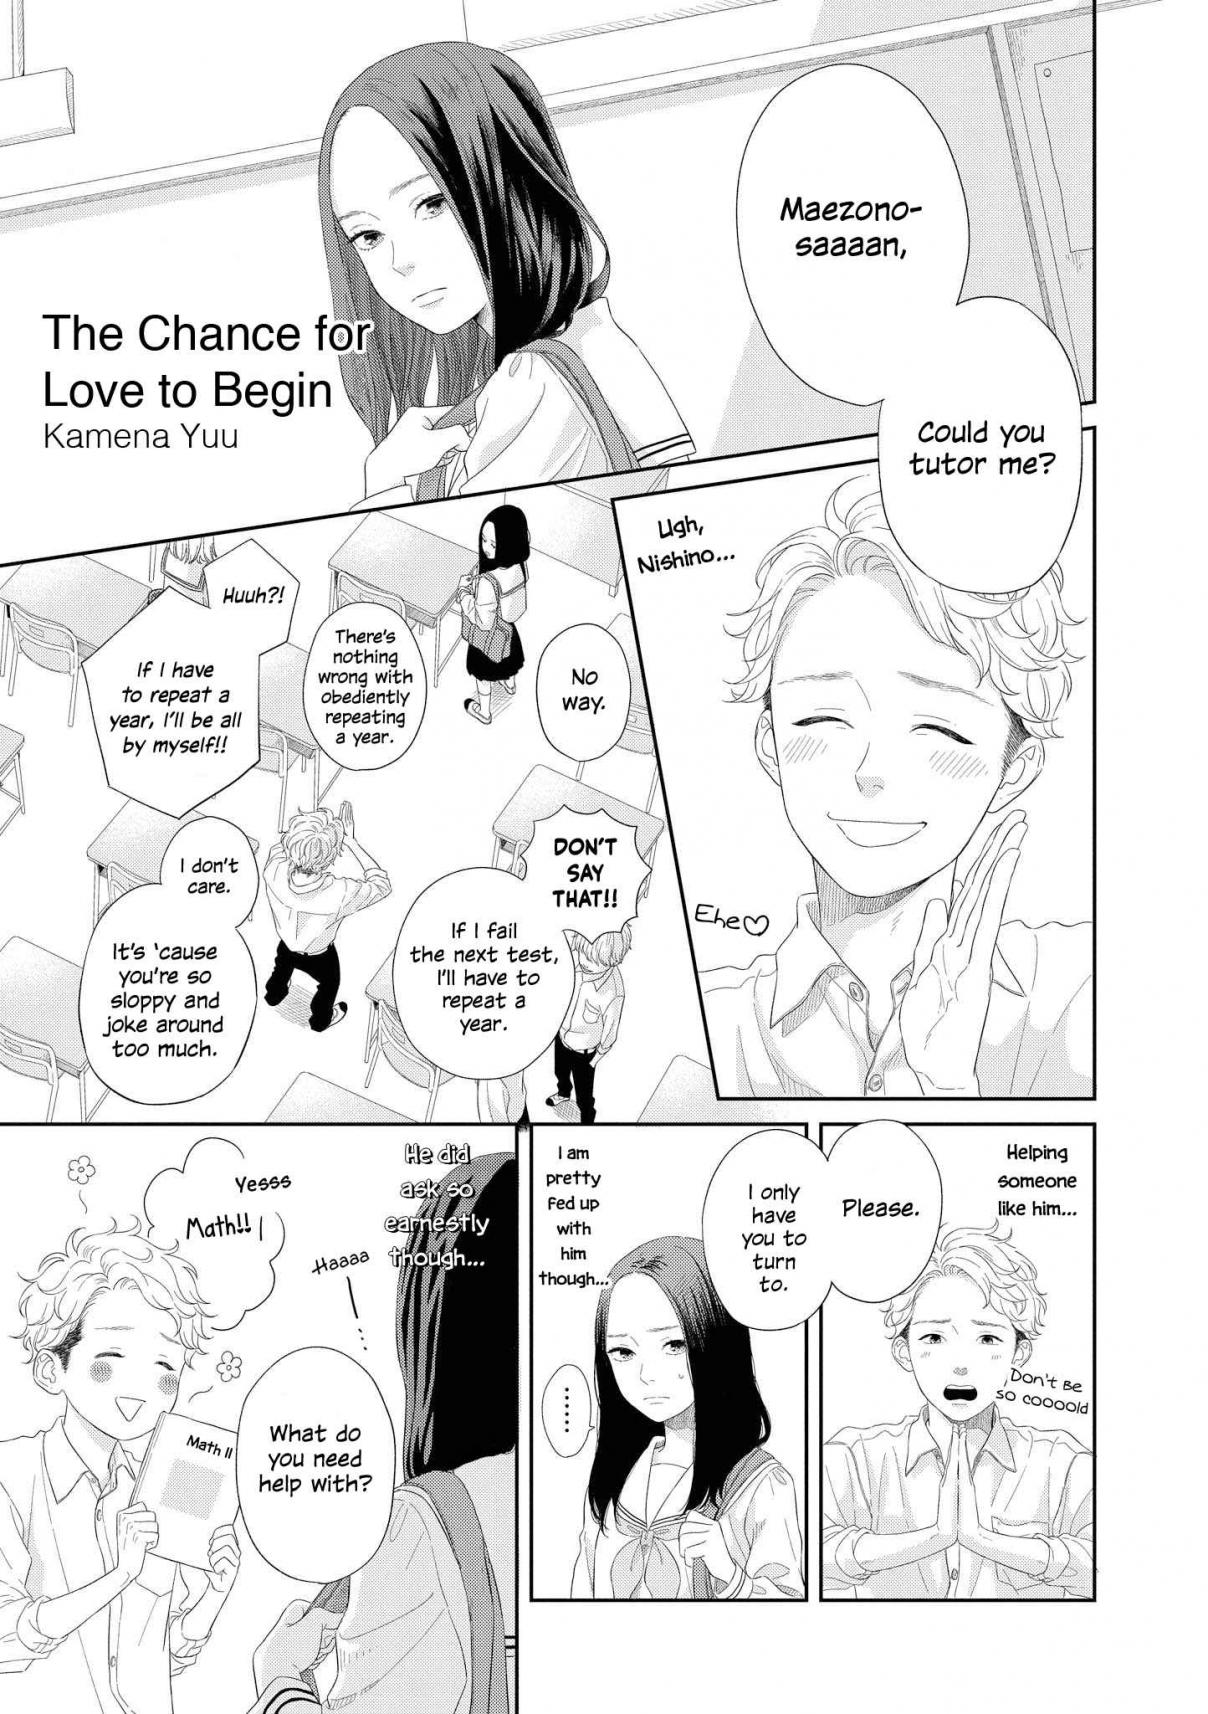 “It’s Too Precious and Hard to Read!!” 4P Short Stories Vol. 1 Ch. 18 The Chance for Love to Begin [by Kamena Yuu]